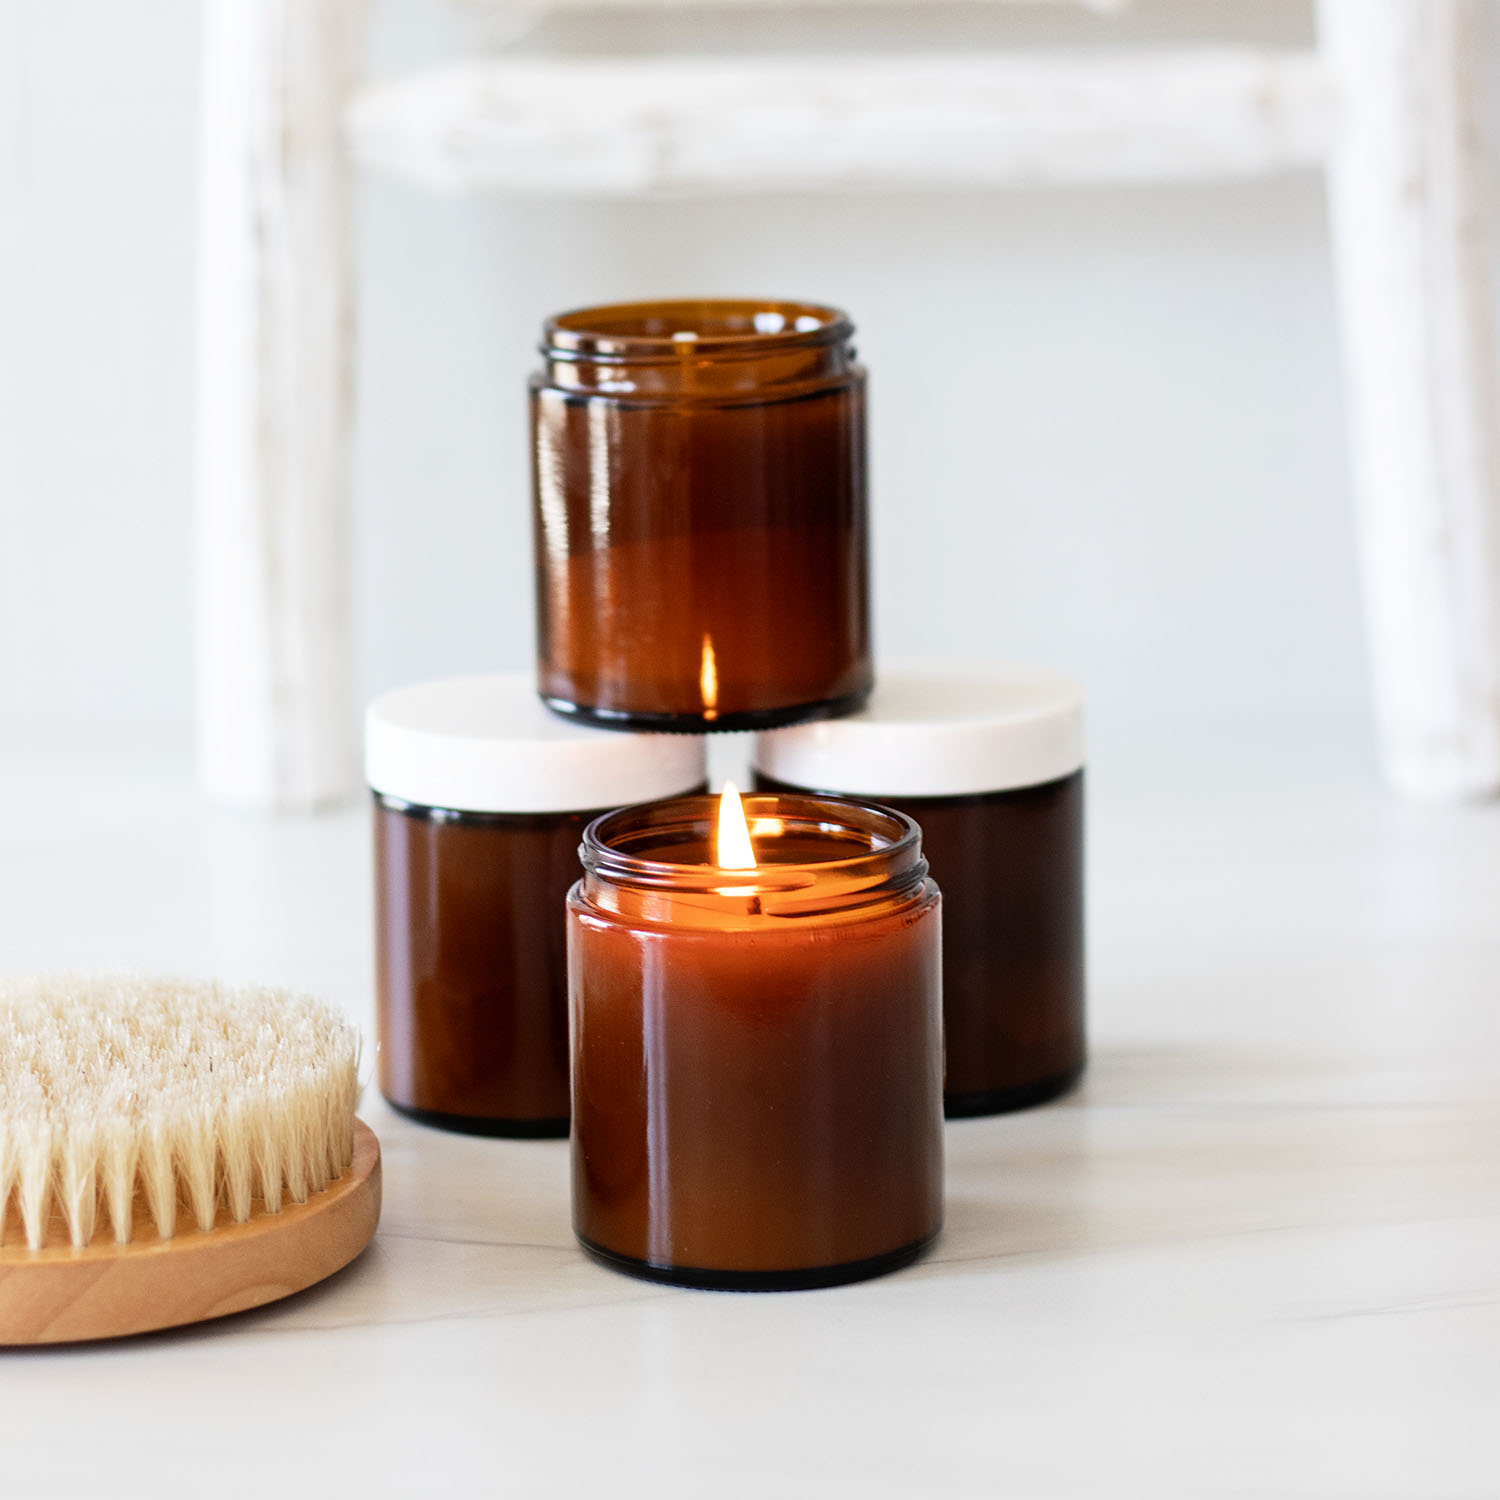 How To Make Massage Candles For A Spa